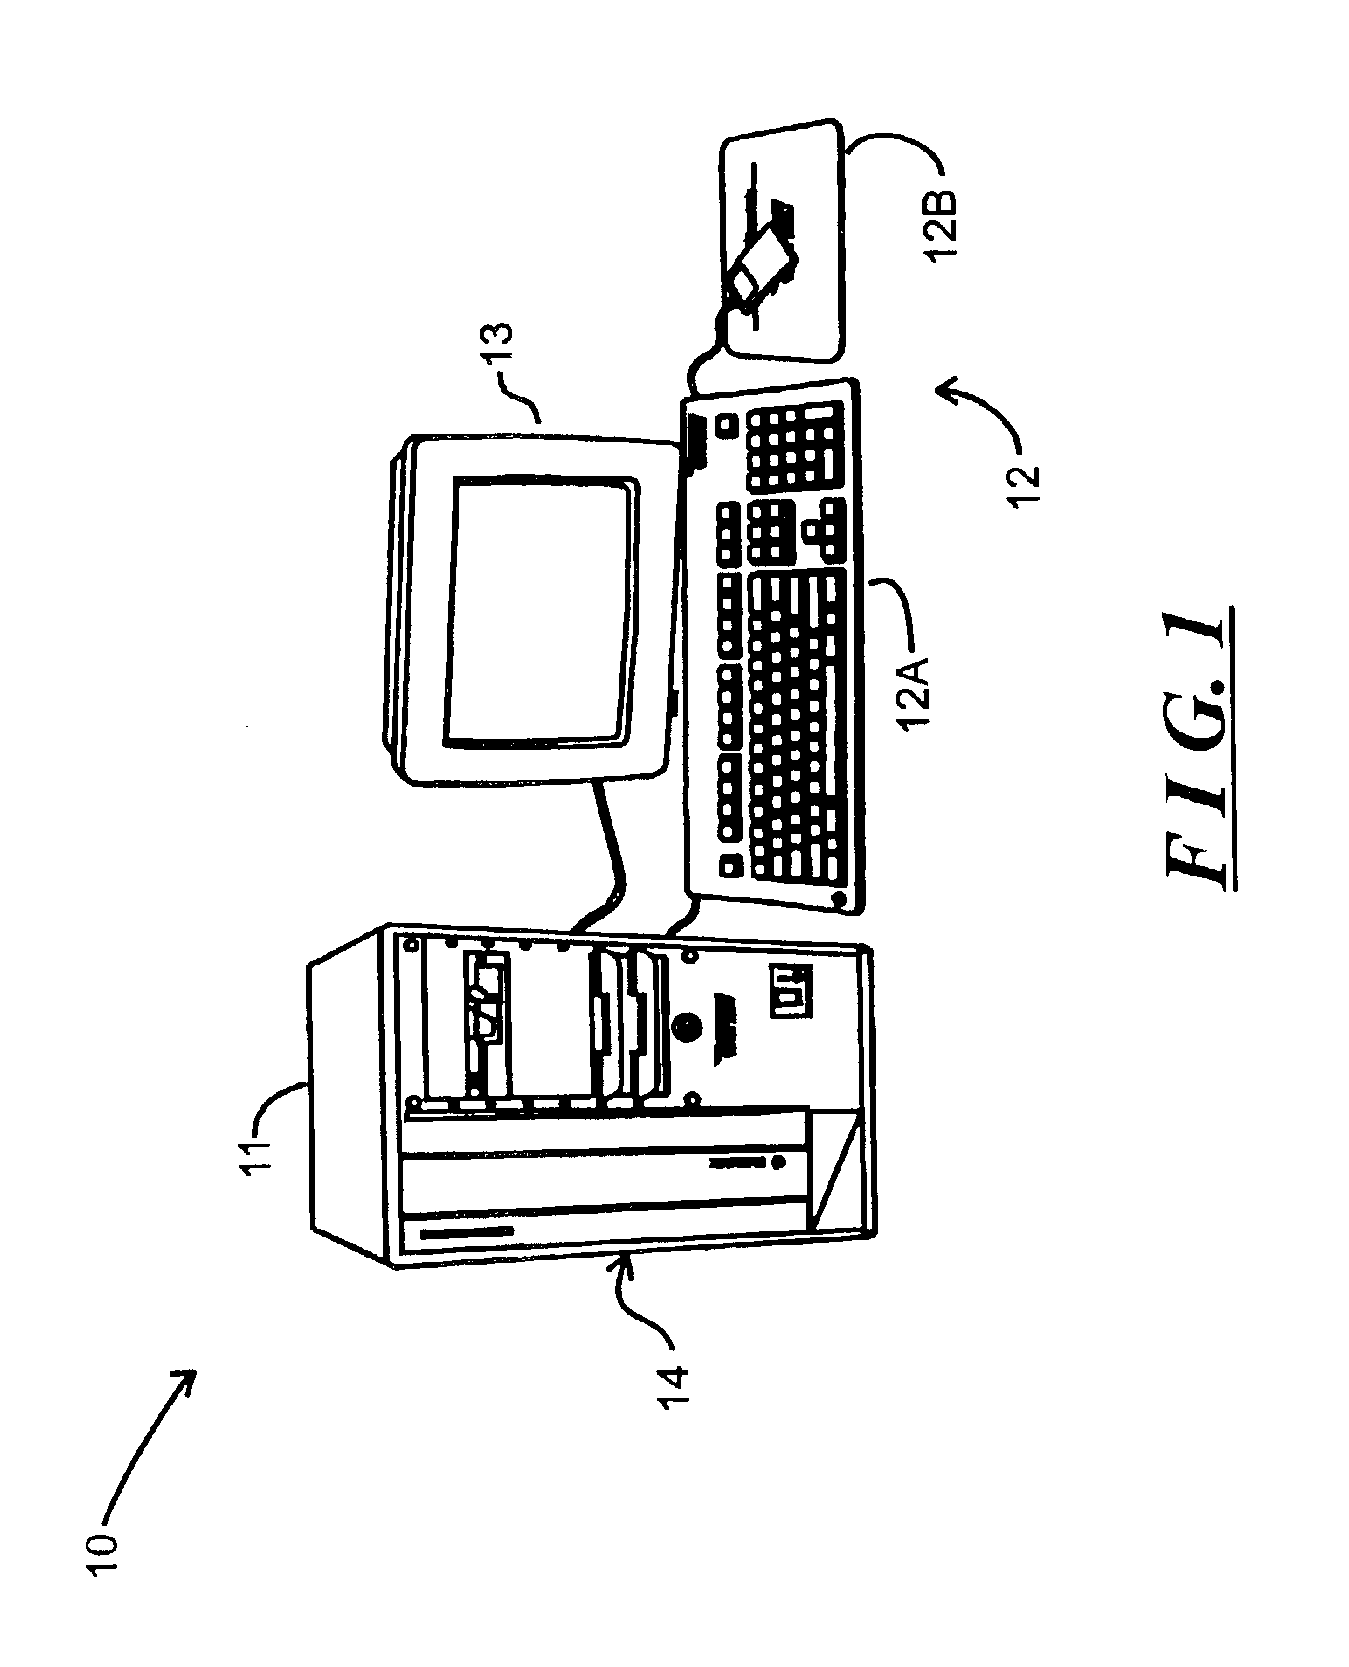 System and method for rendering images using a strictly-deterministic methodology for generating a coarse sequence of sample points